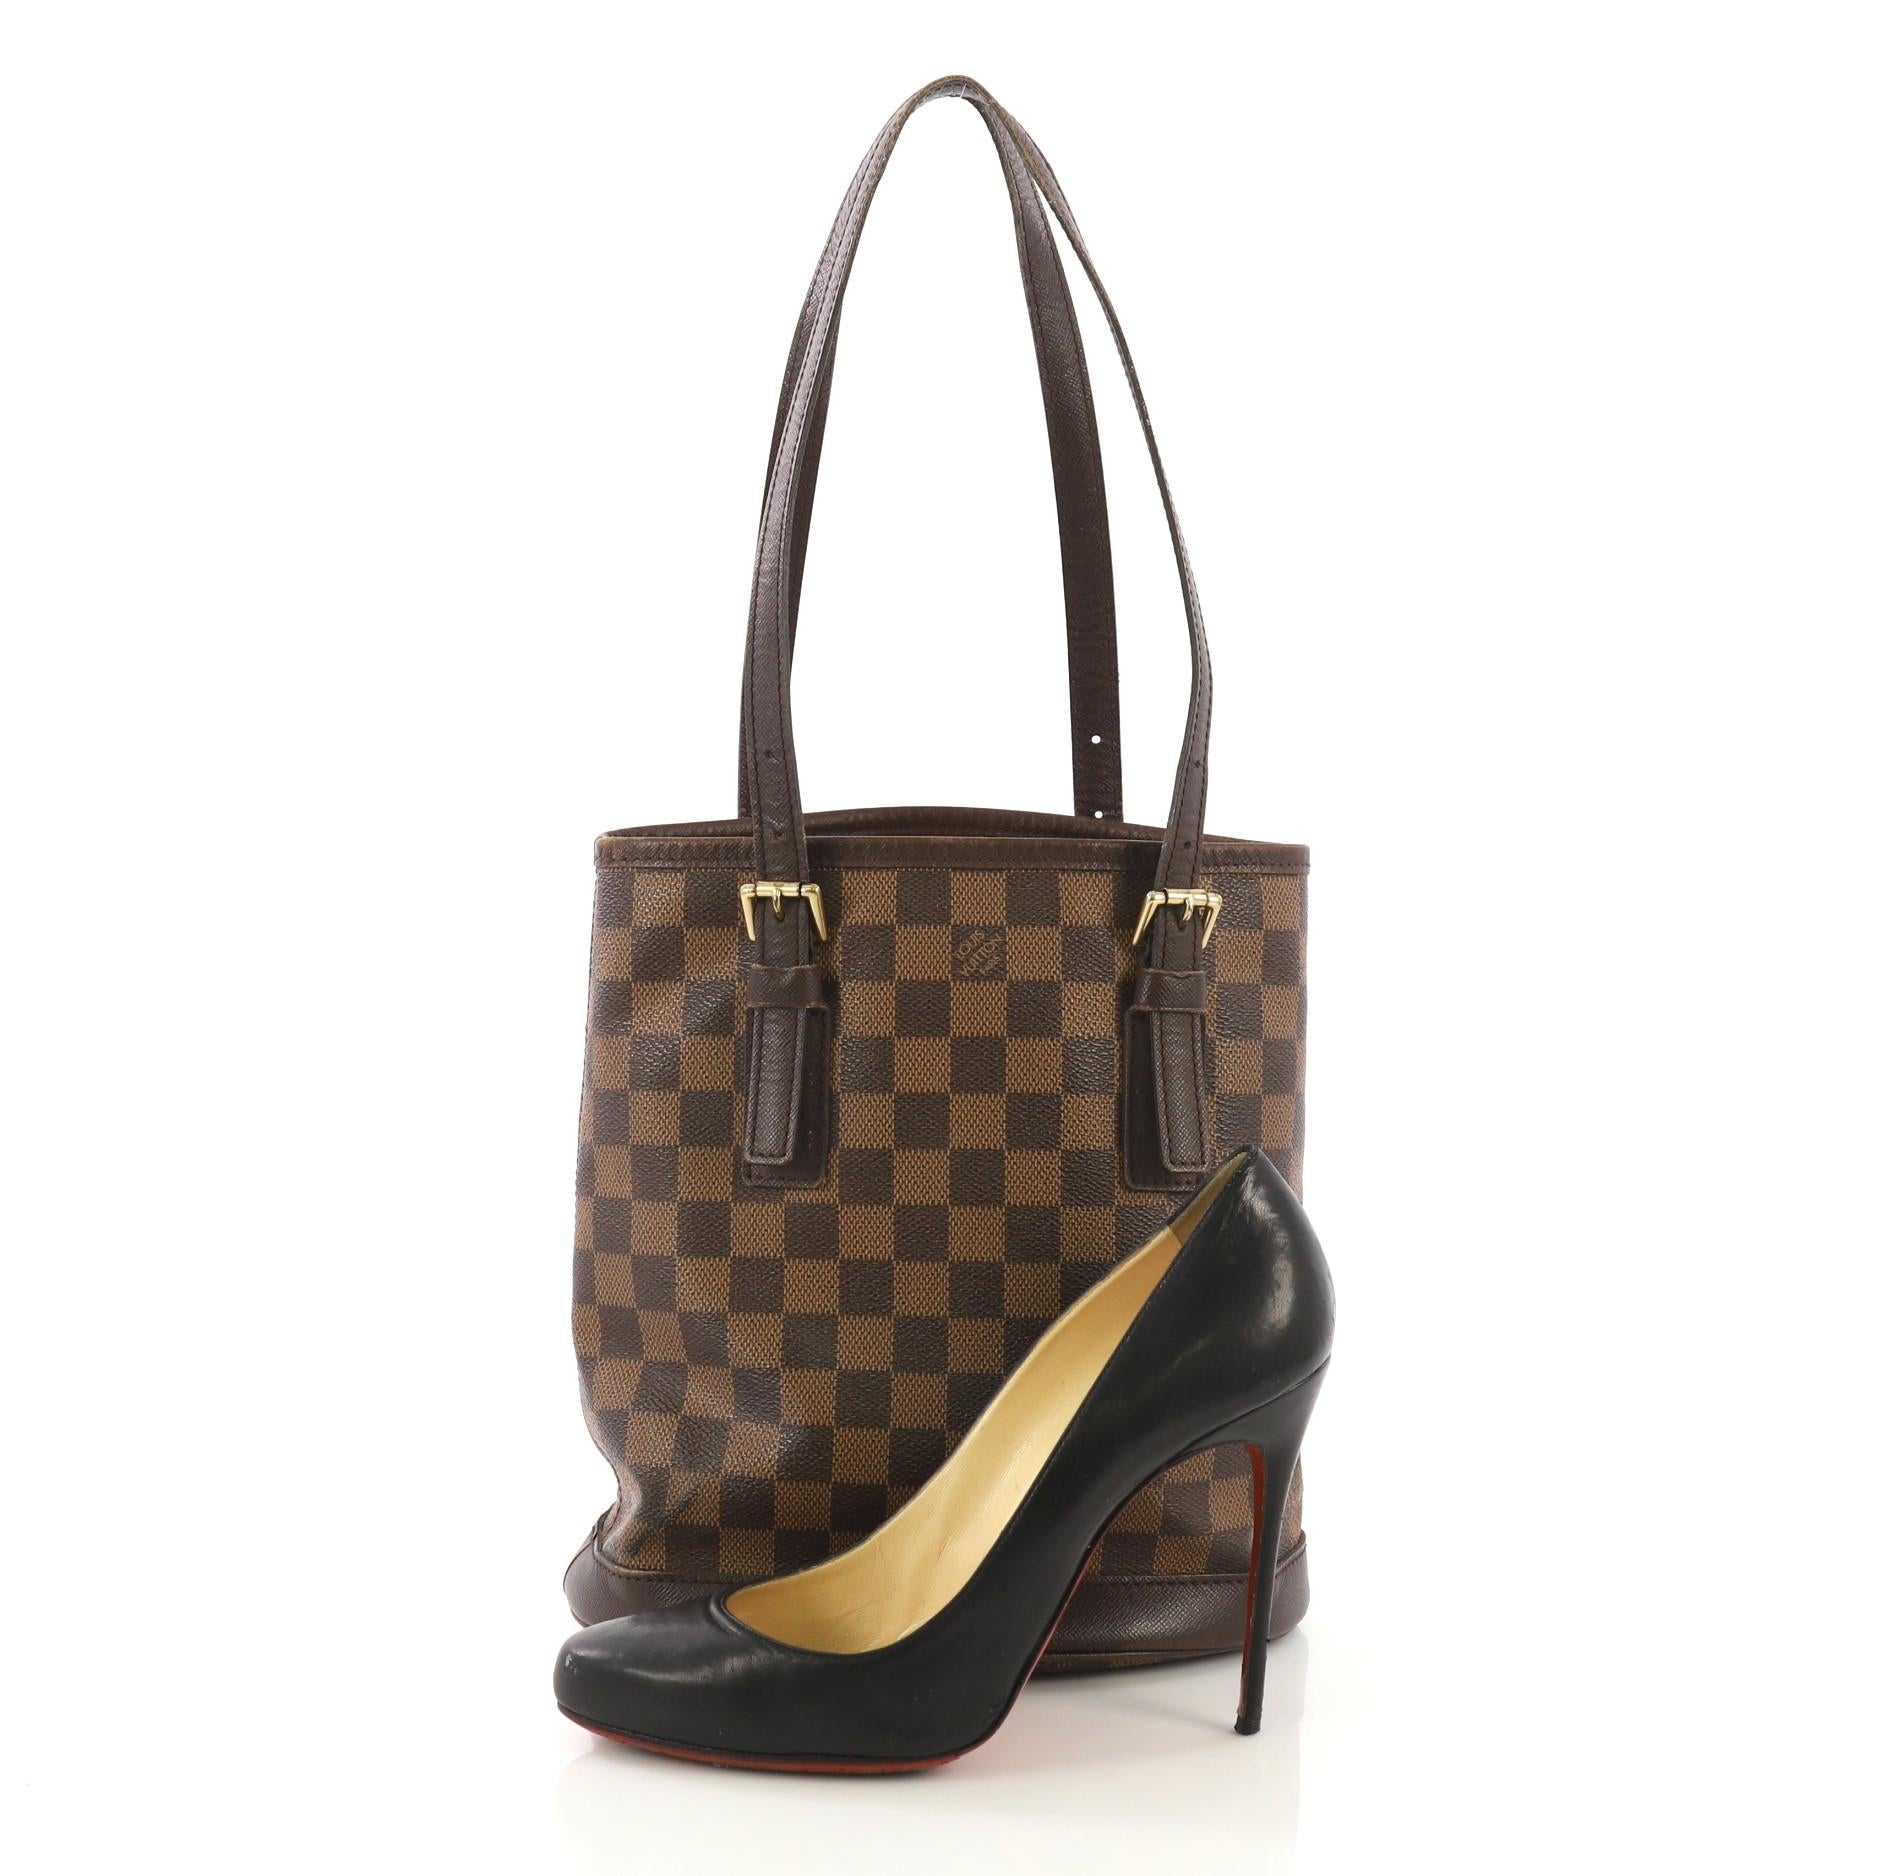 This Louis Vuitton Marais Bucket Bag Damier, crafted from damier ebene coated canvas, features dual tall leather handles with buckle details, leather trim, and gold-tone hardware. It opens to an orange microfiber interior with side zip pockets.